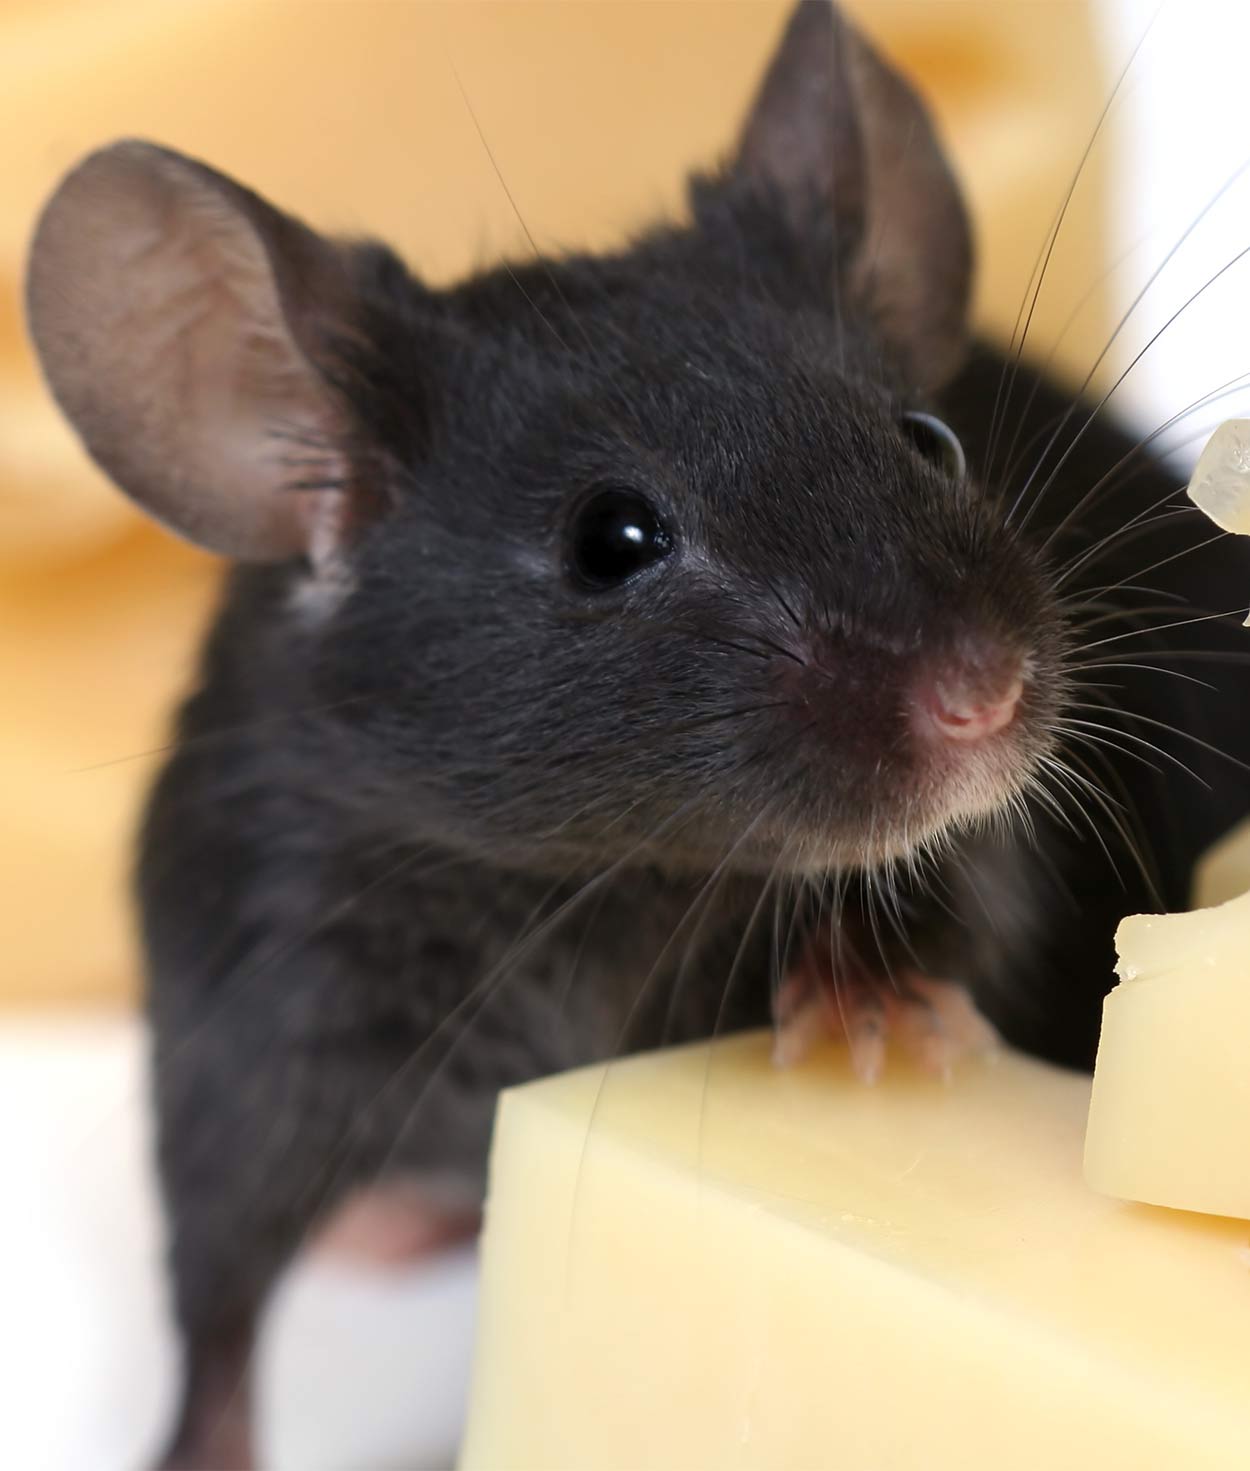 Pet Mice - A Complete Guide To Mice and Mouse Care